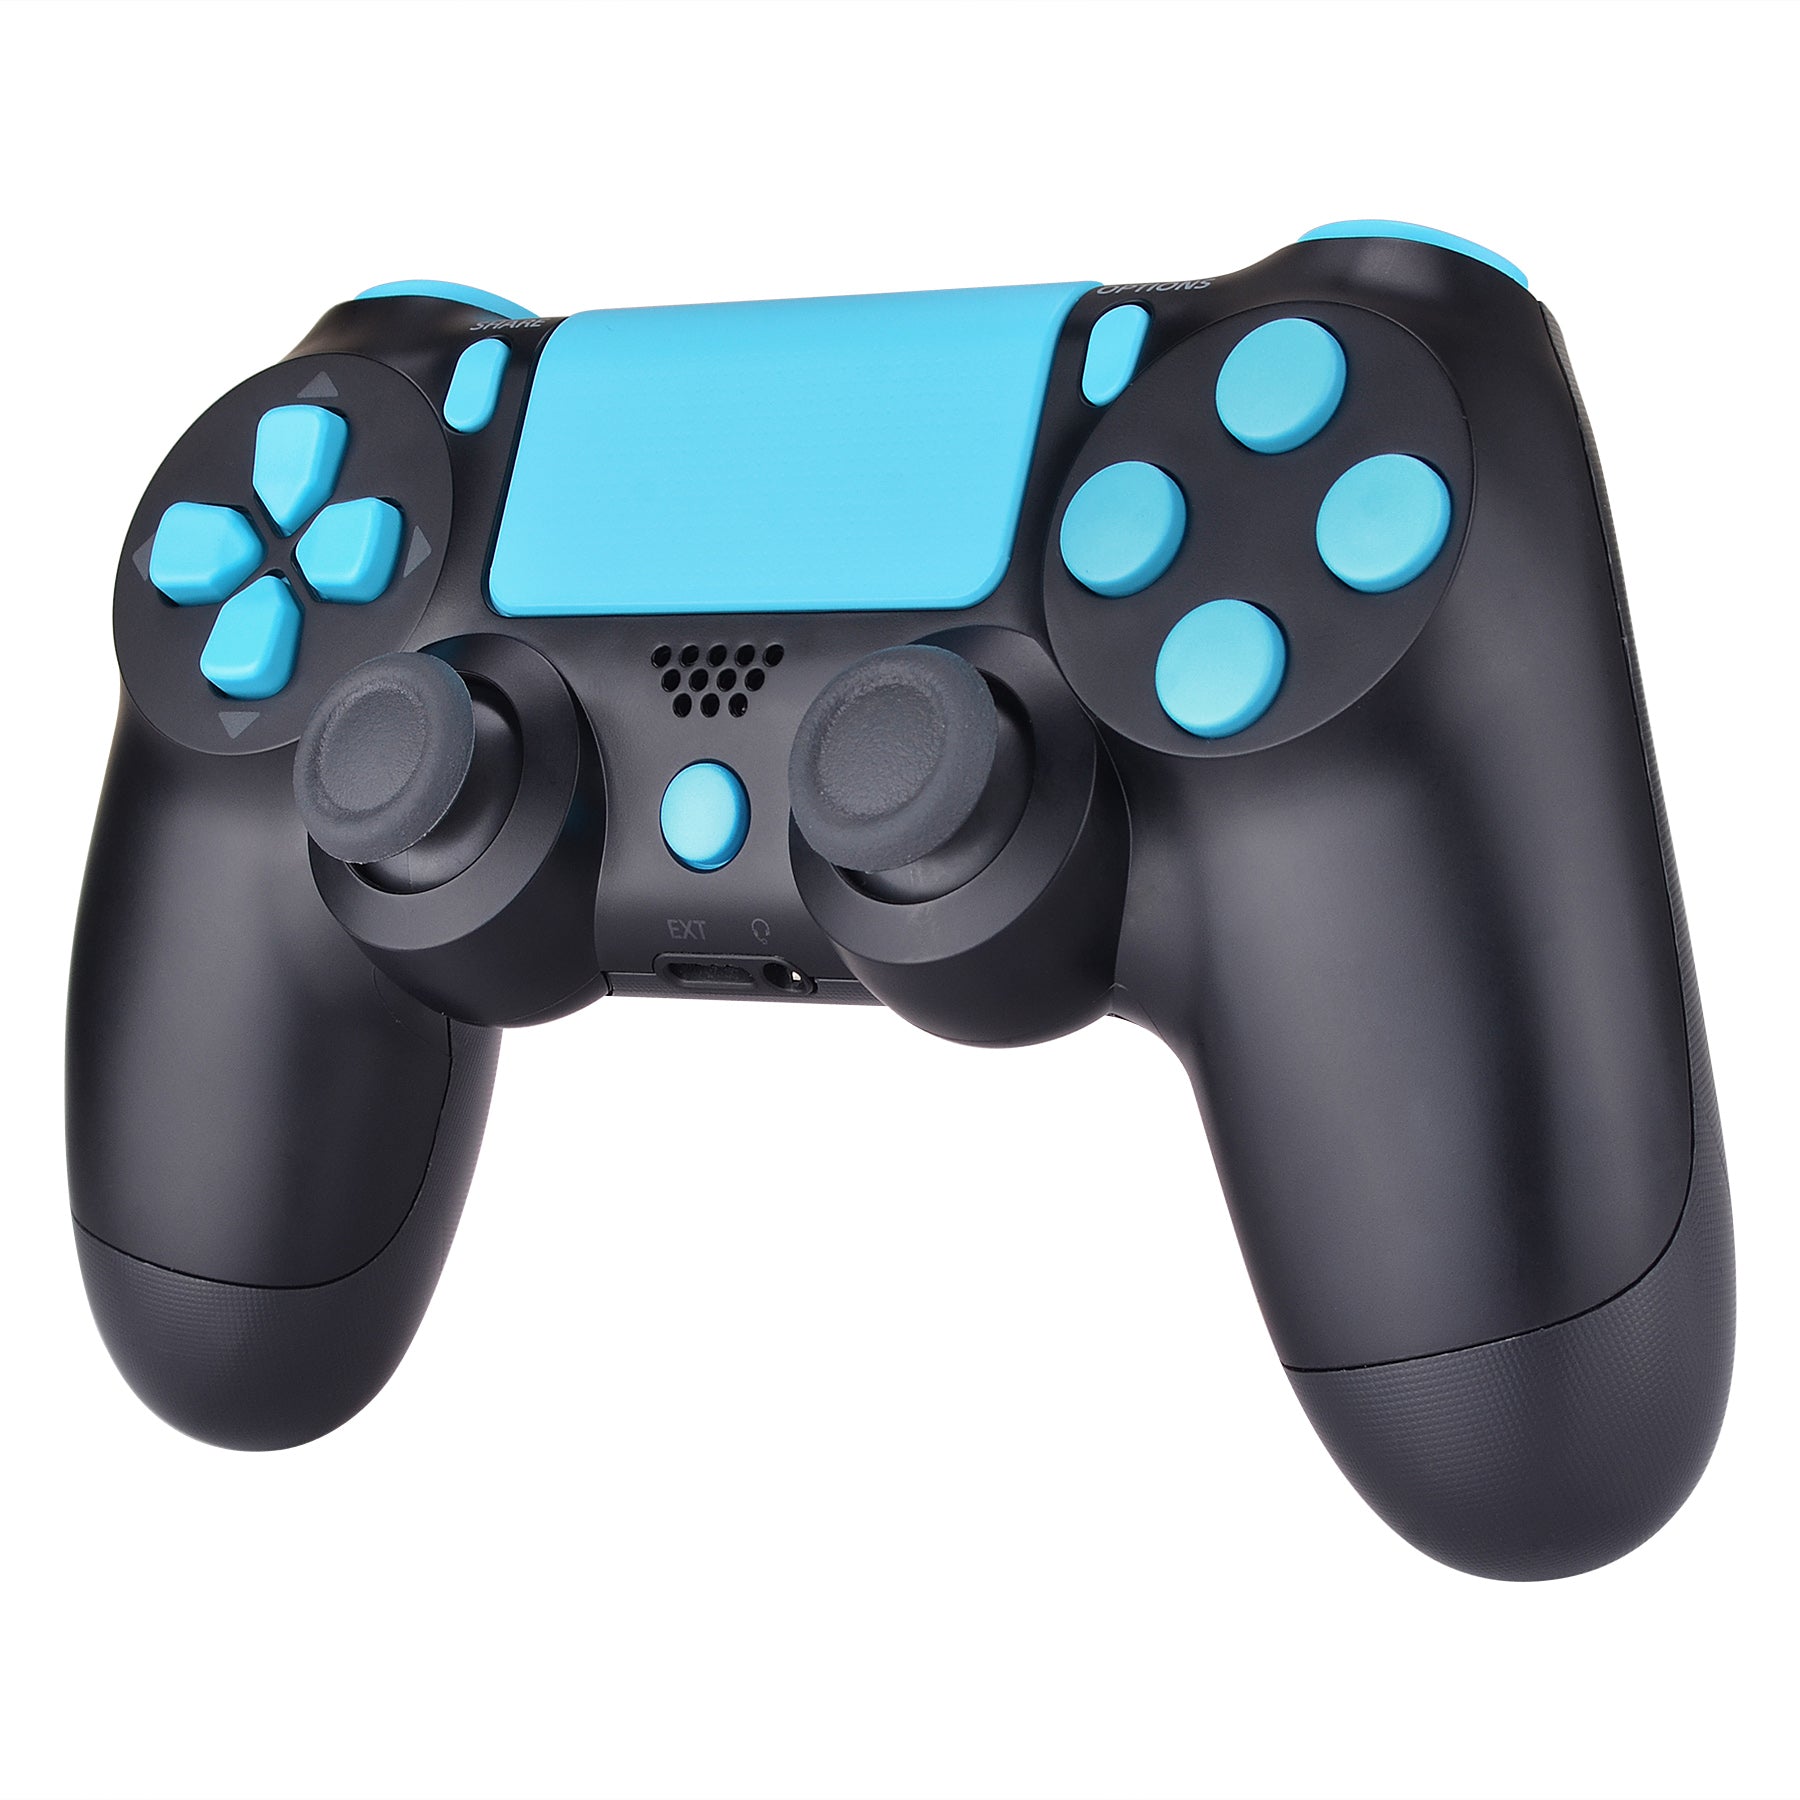 eXtremeRate Retail Replacement D-pad R1 L1 R2 L2 Triggers Touchpad Action Home Share Options Buttons, Heaven Blue Full Set Buttons Repair Kits with Tool for ps4 Slim ps4 Pro CUH-ZCT2 Controller - SP4J0410